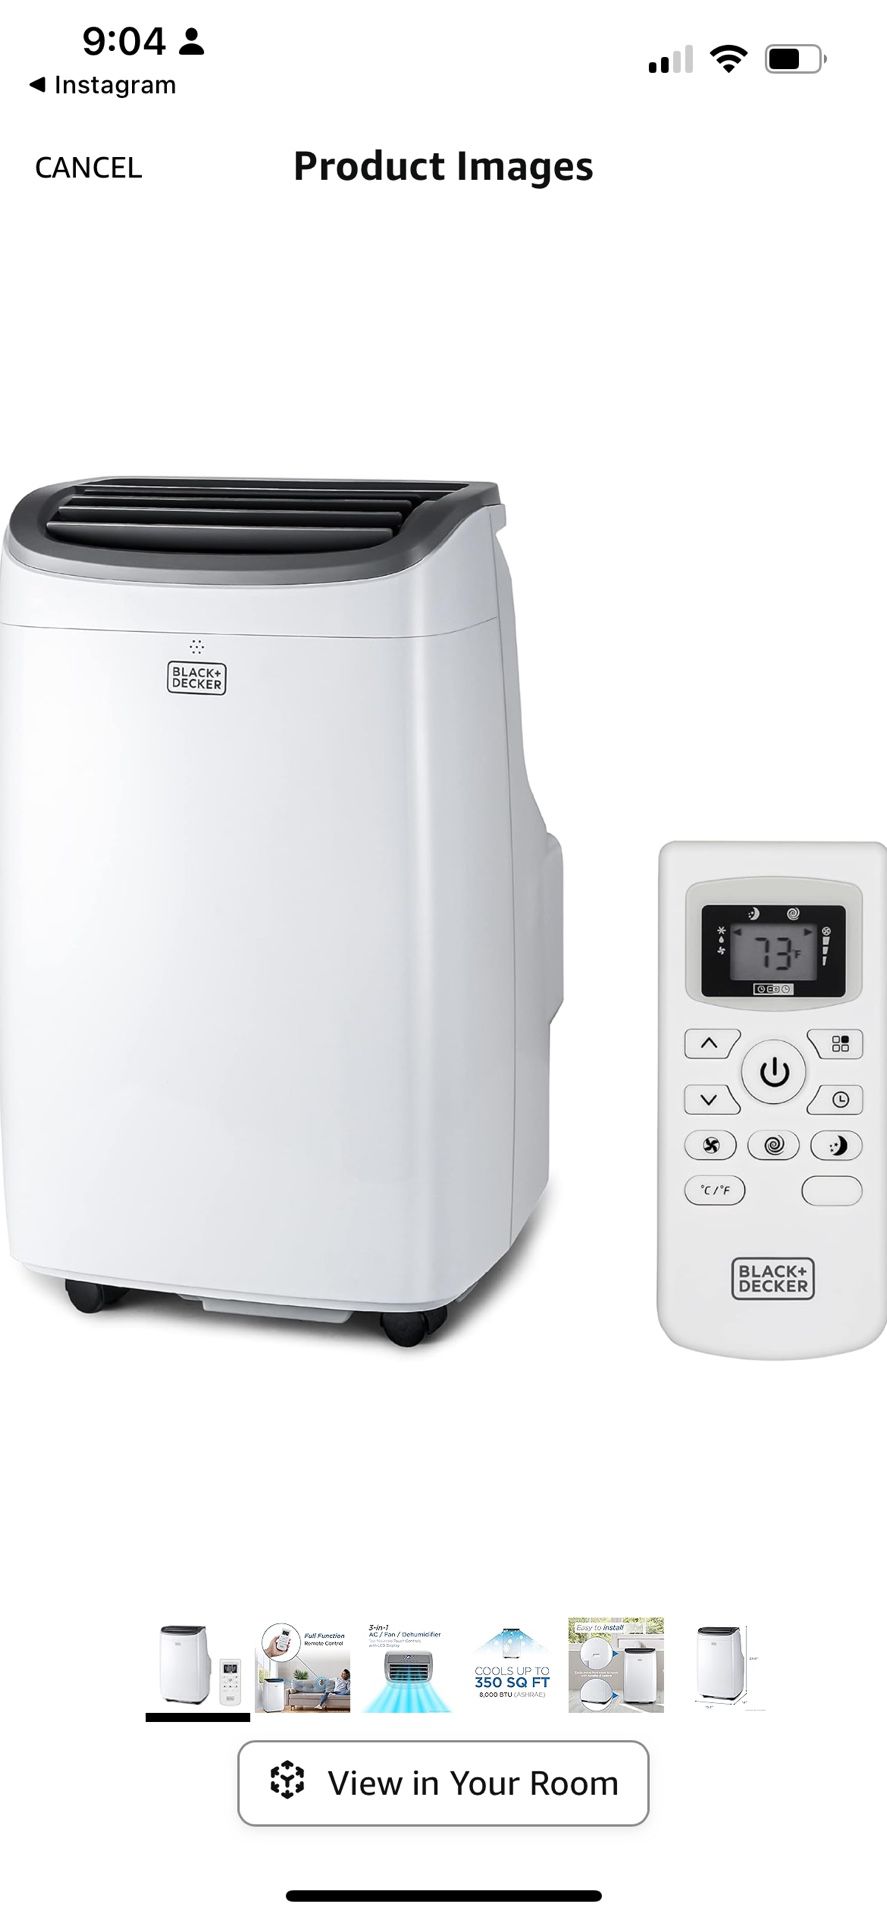 BLACK+DECKER 8,000 BTU Portable Air Conditioner up to 350 Sq.Ft. with Remote Control